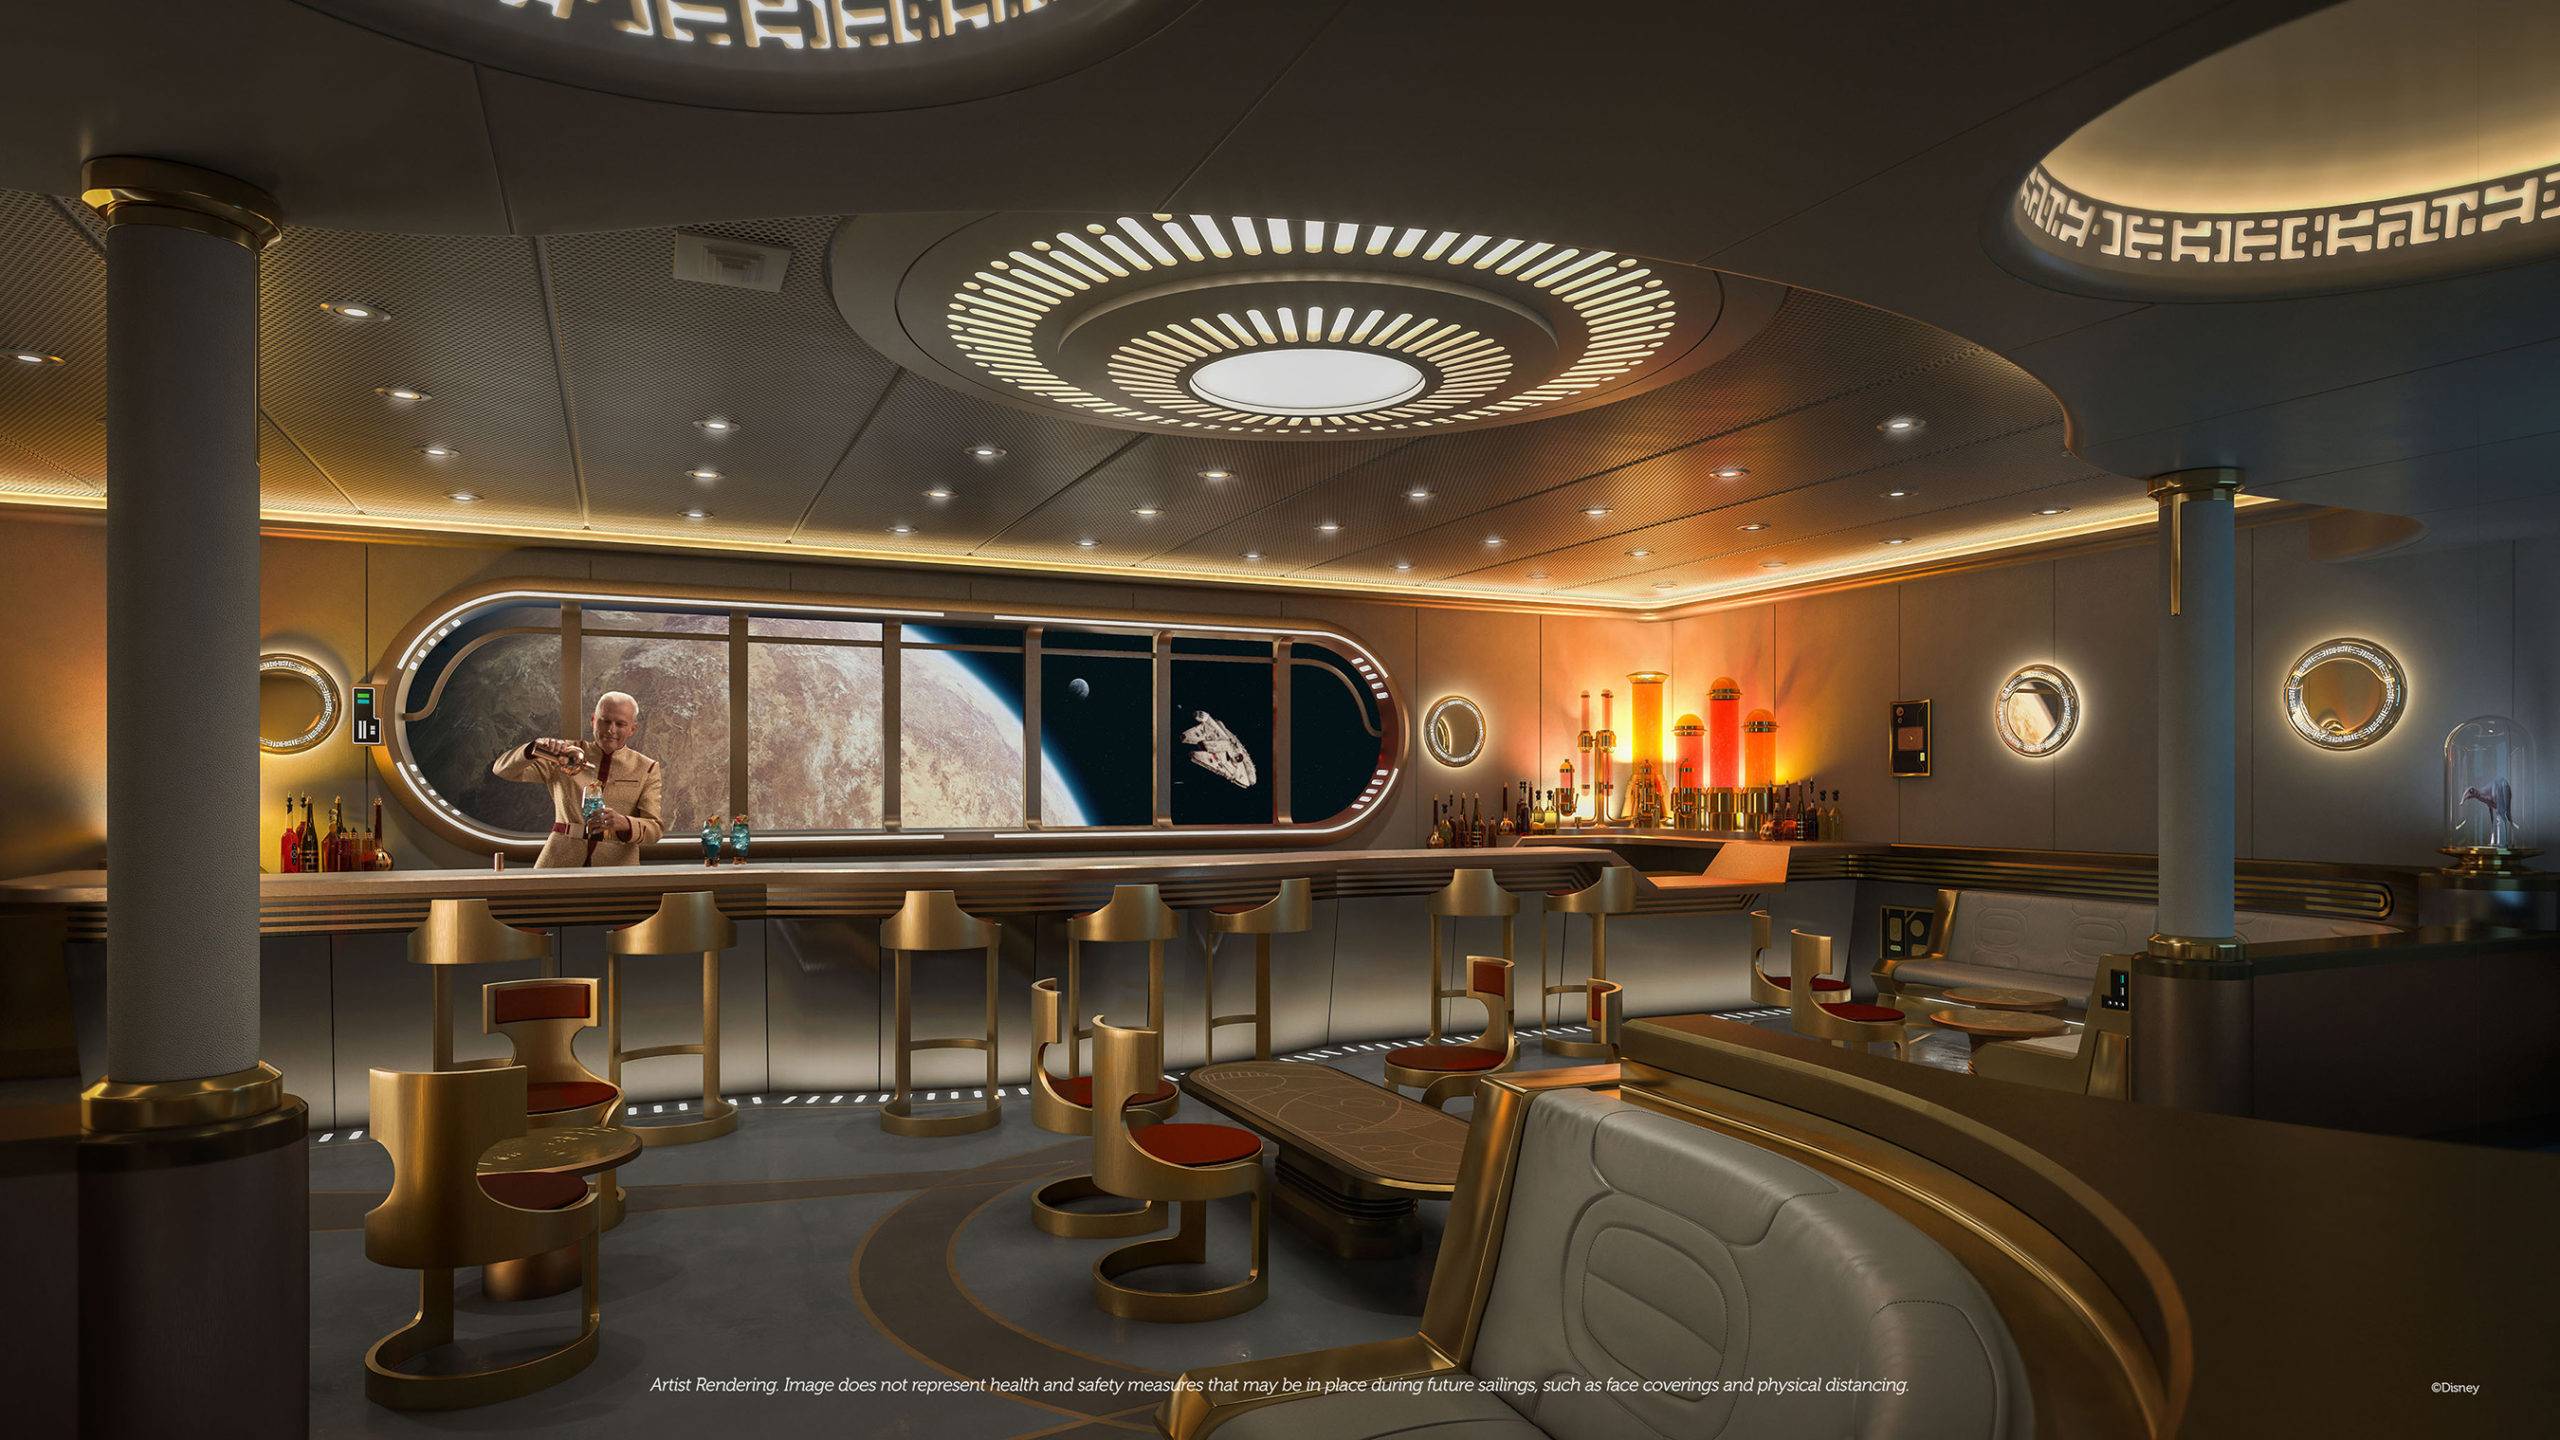 'Star Wars - Hyperspace Lounge' brings a high-end bar styled as a luxurious yacht-class spaceship to the Disney Wish